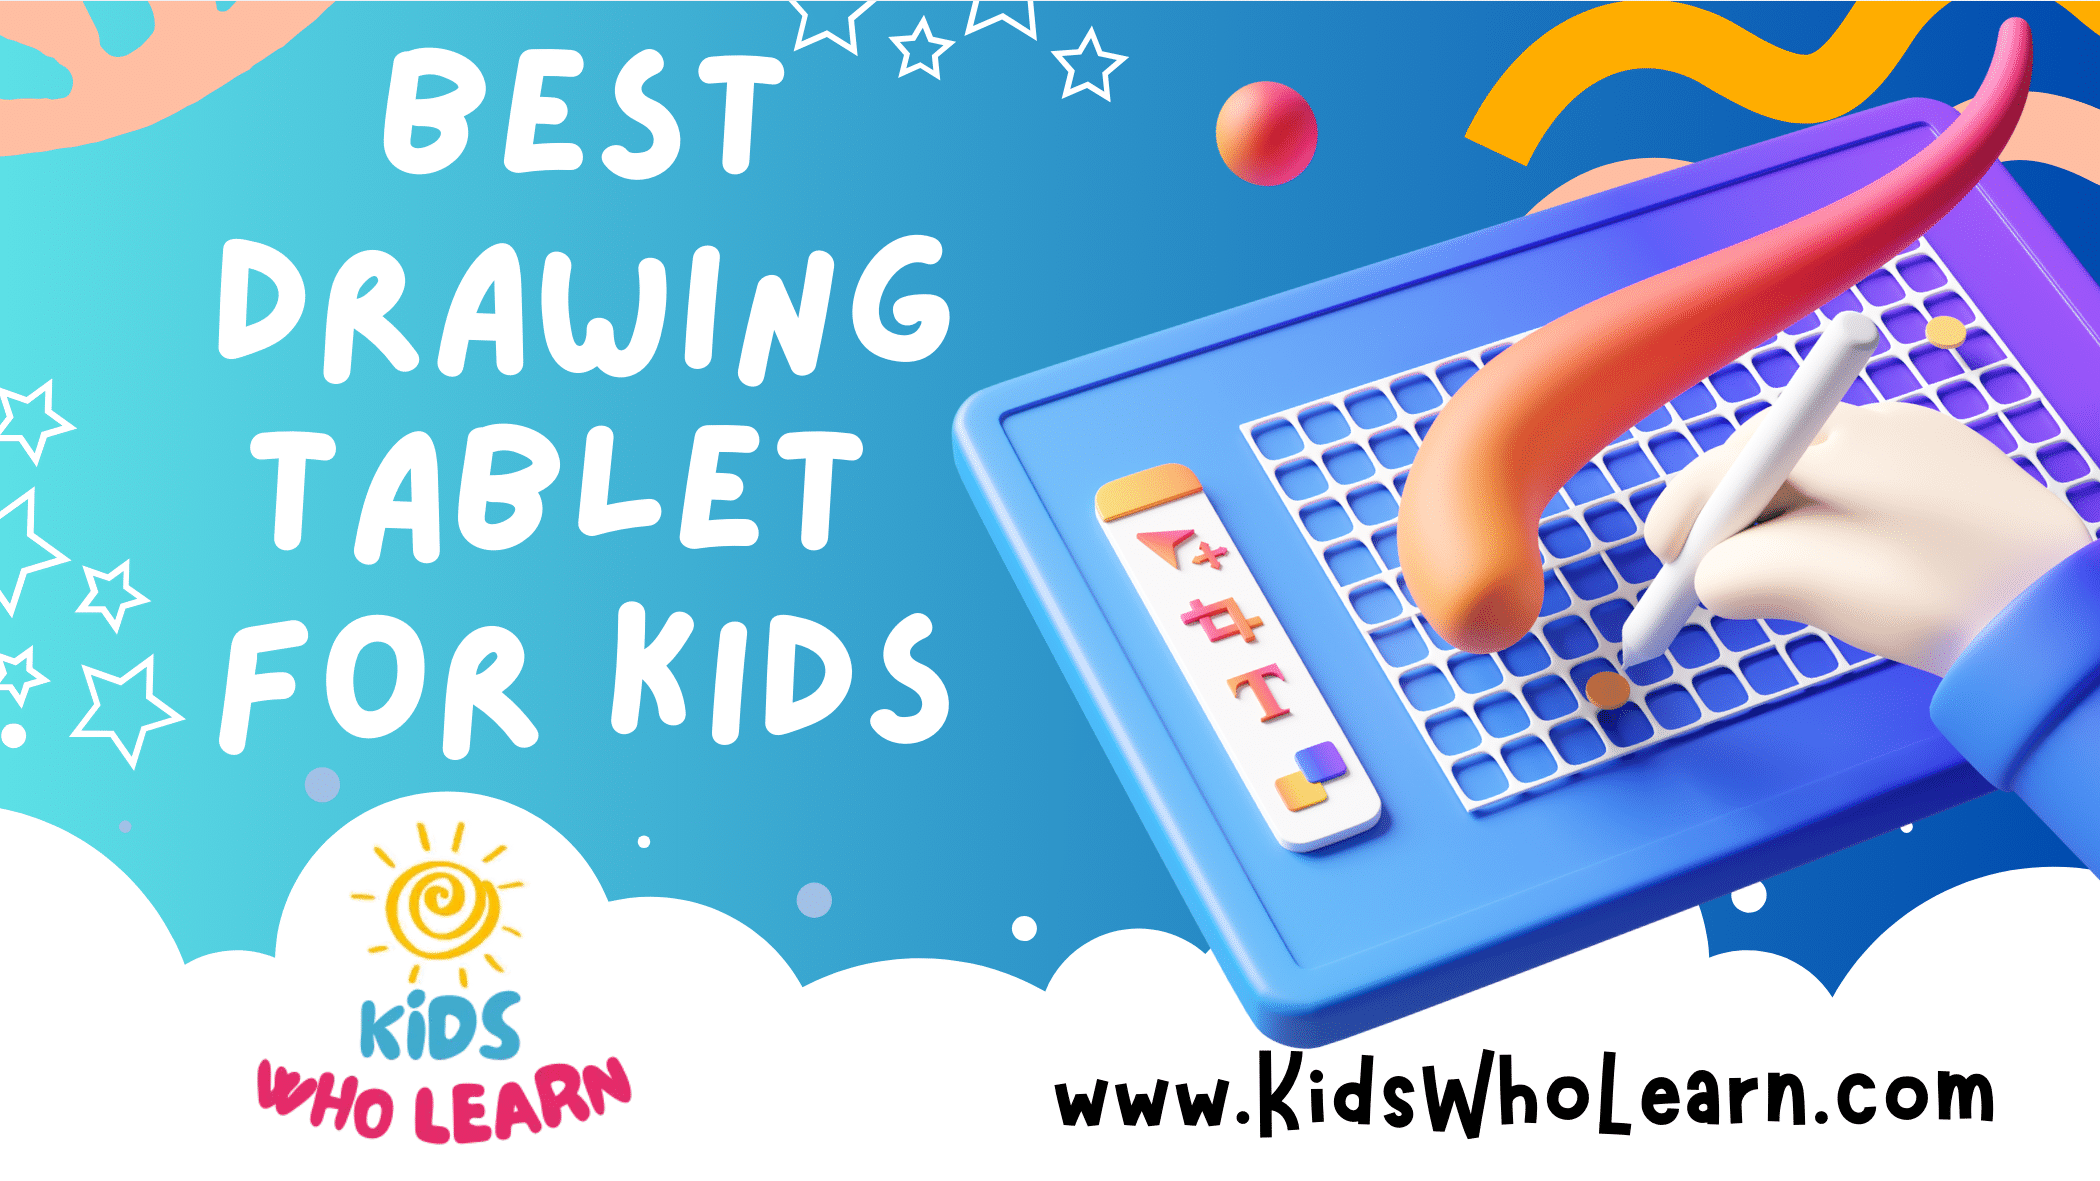 The Best Drawing Tablet for Kids: Unleash Creativity